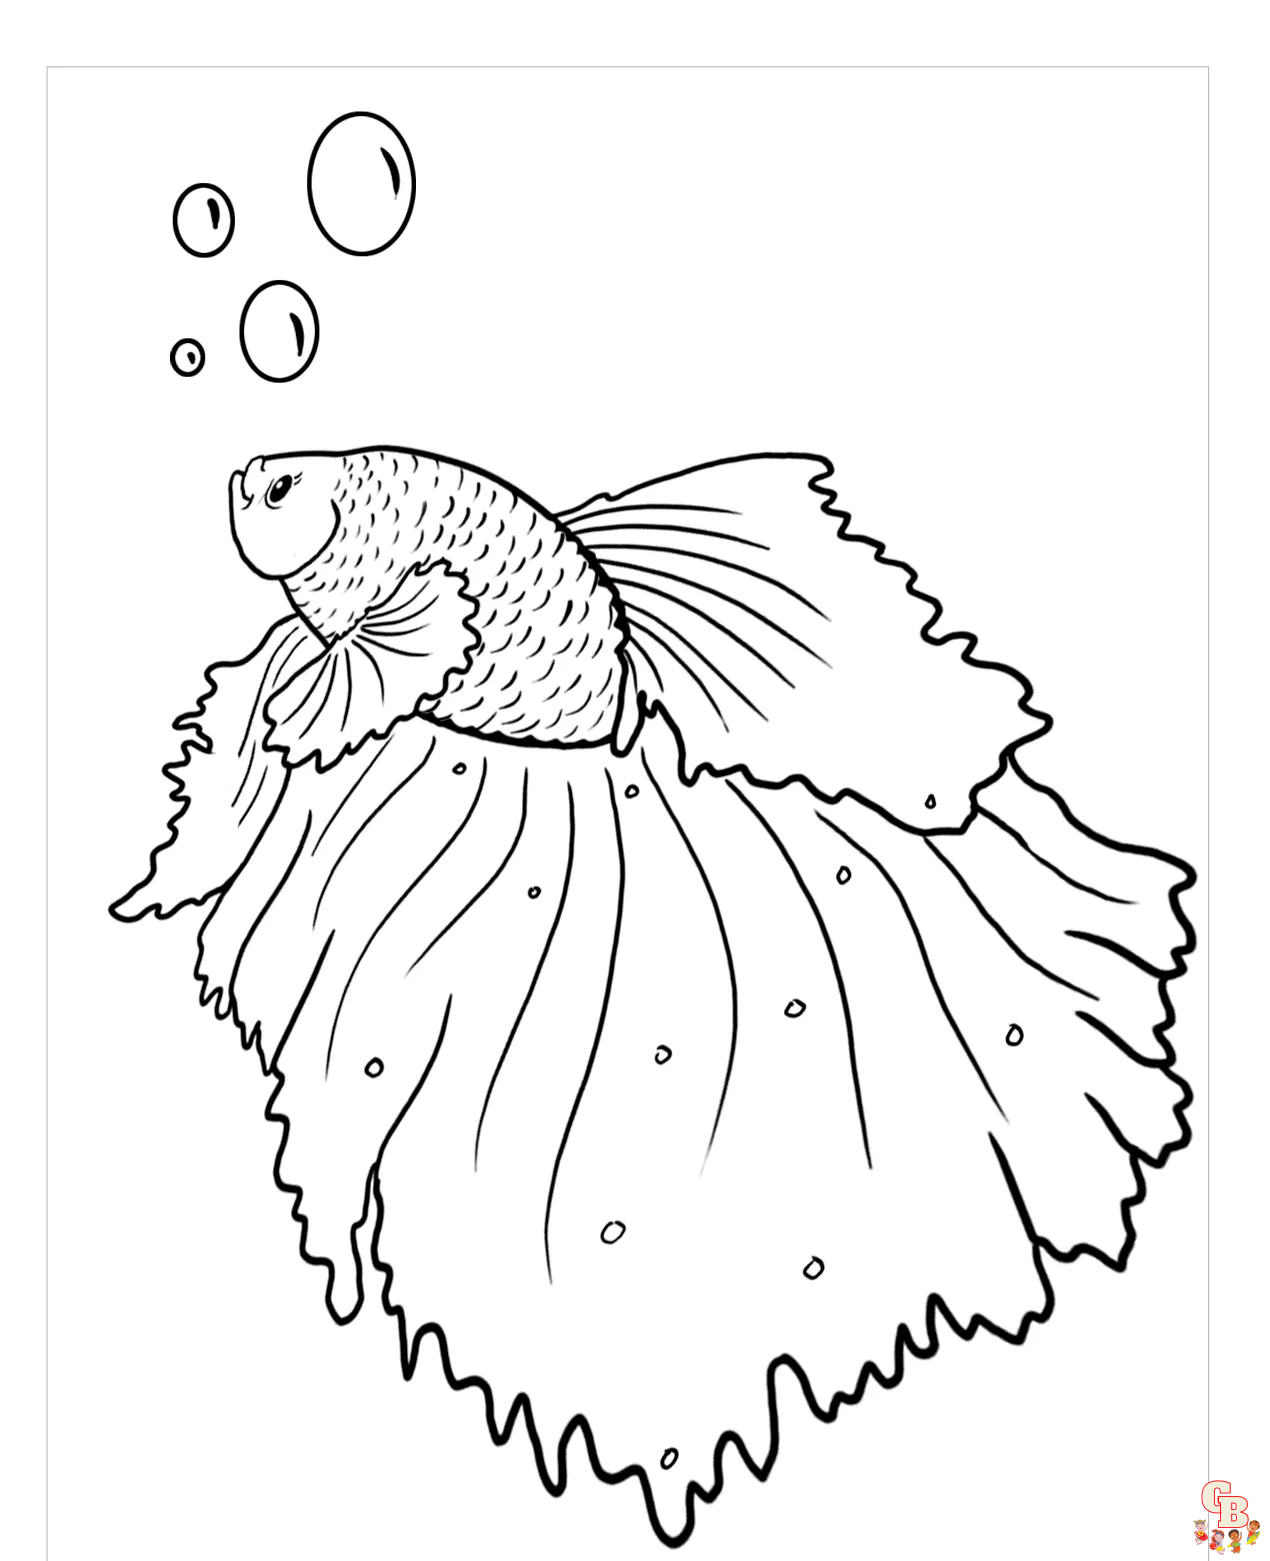 Betta Fish Coloring Pages 3